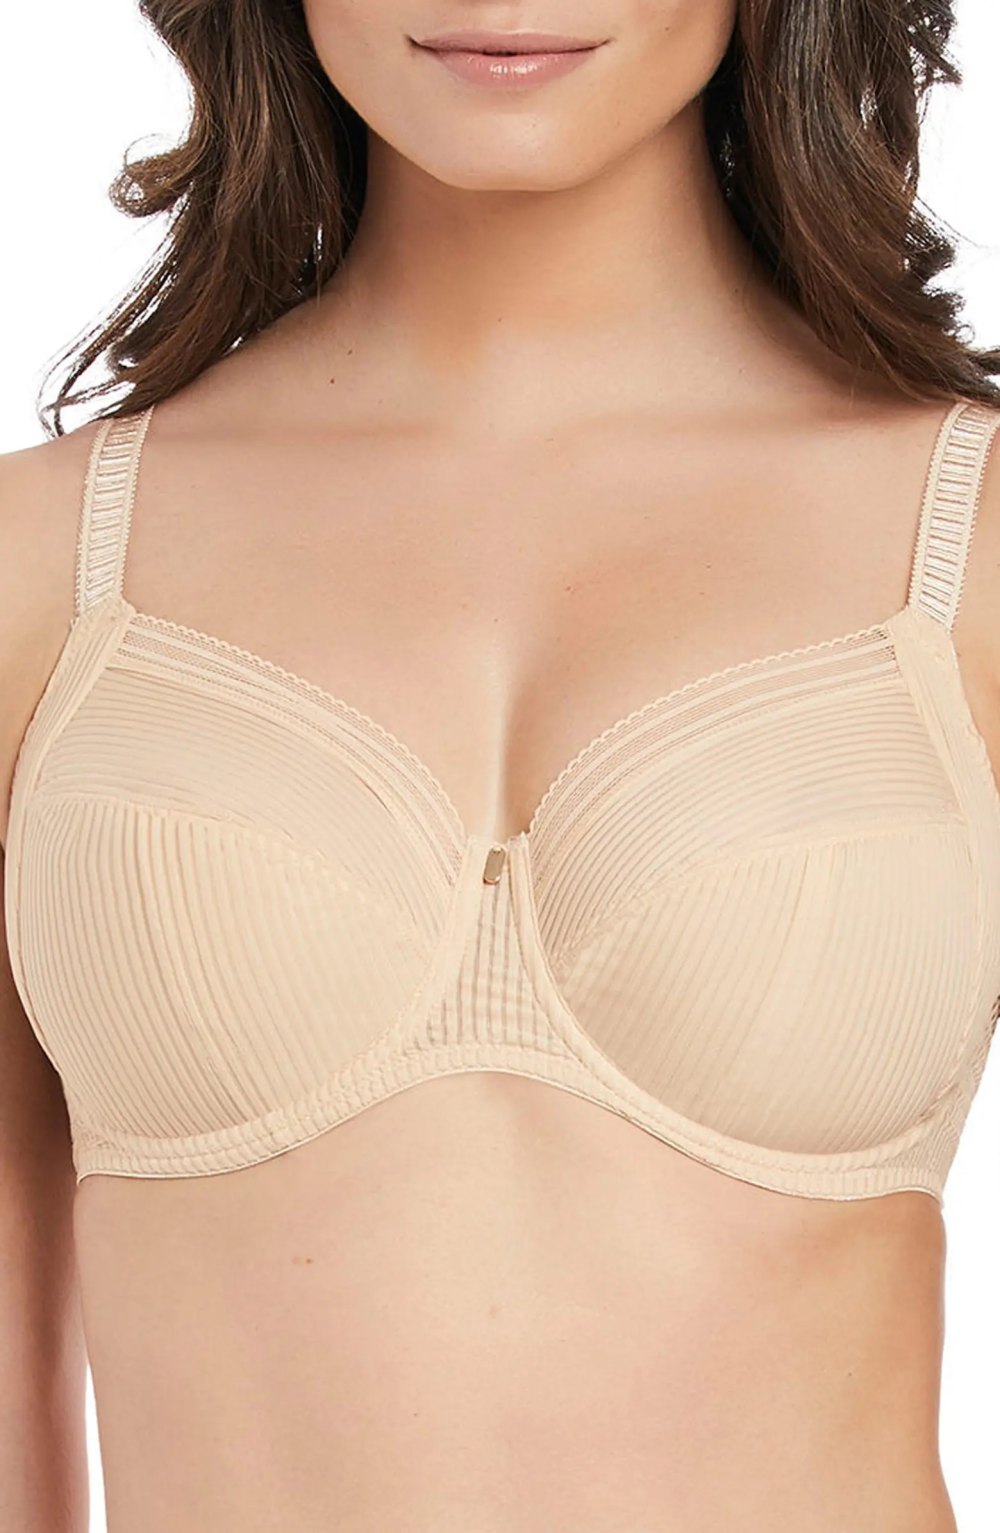 Tips to consider when buying the best bra for a large bust, by fitaumax